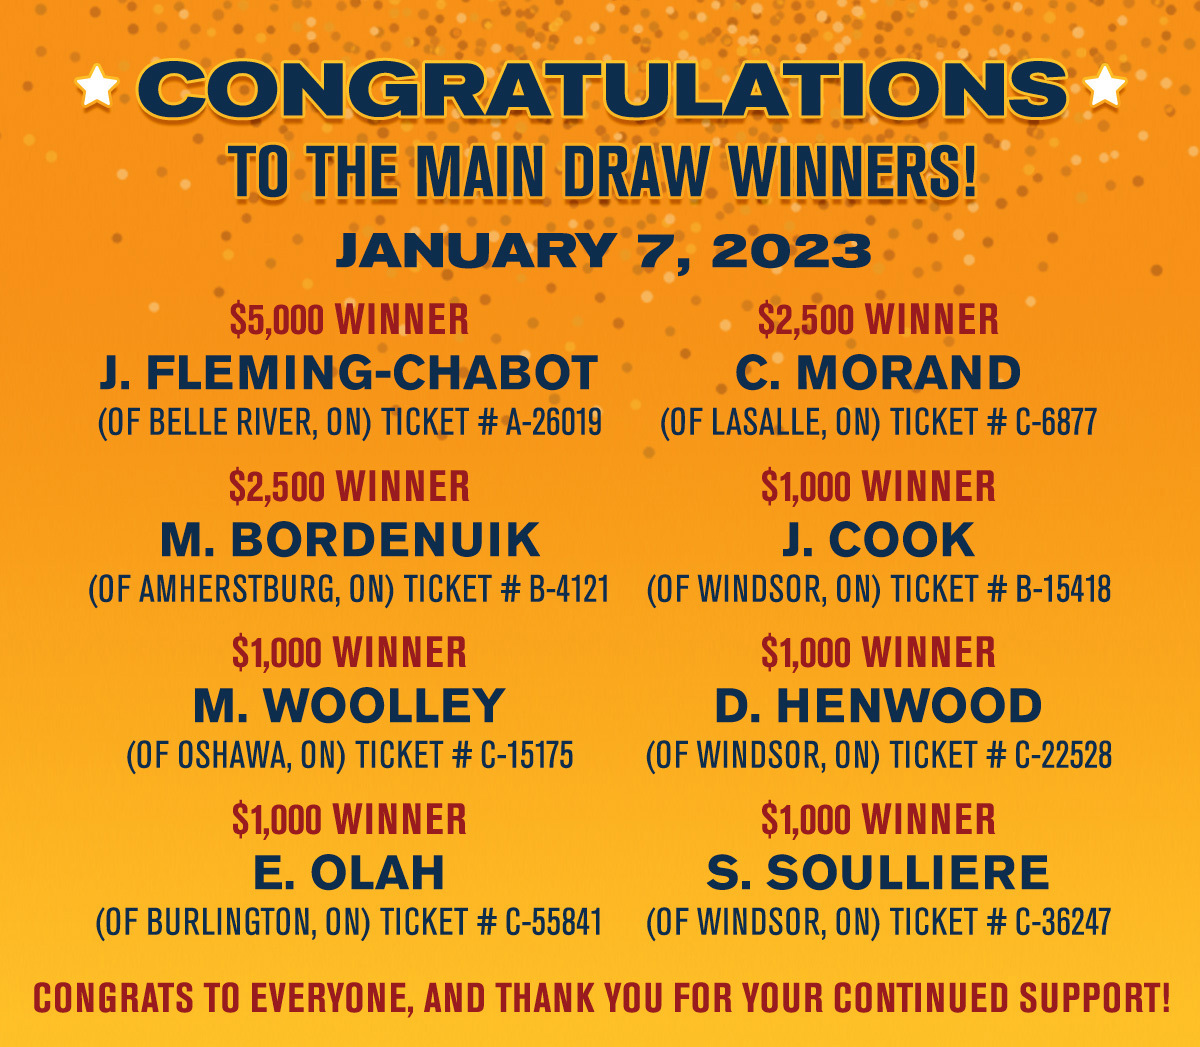 Congratulations to the Main Draw Winners!